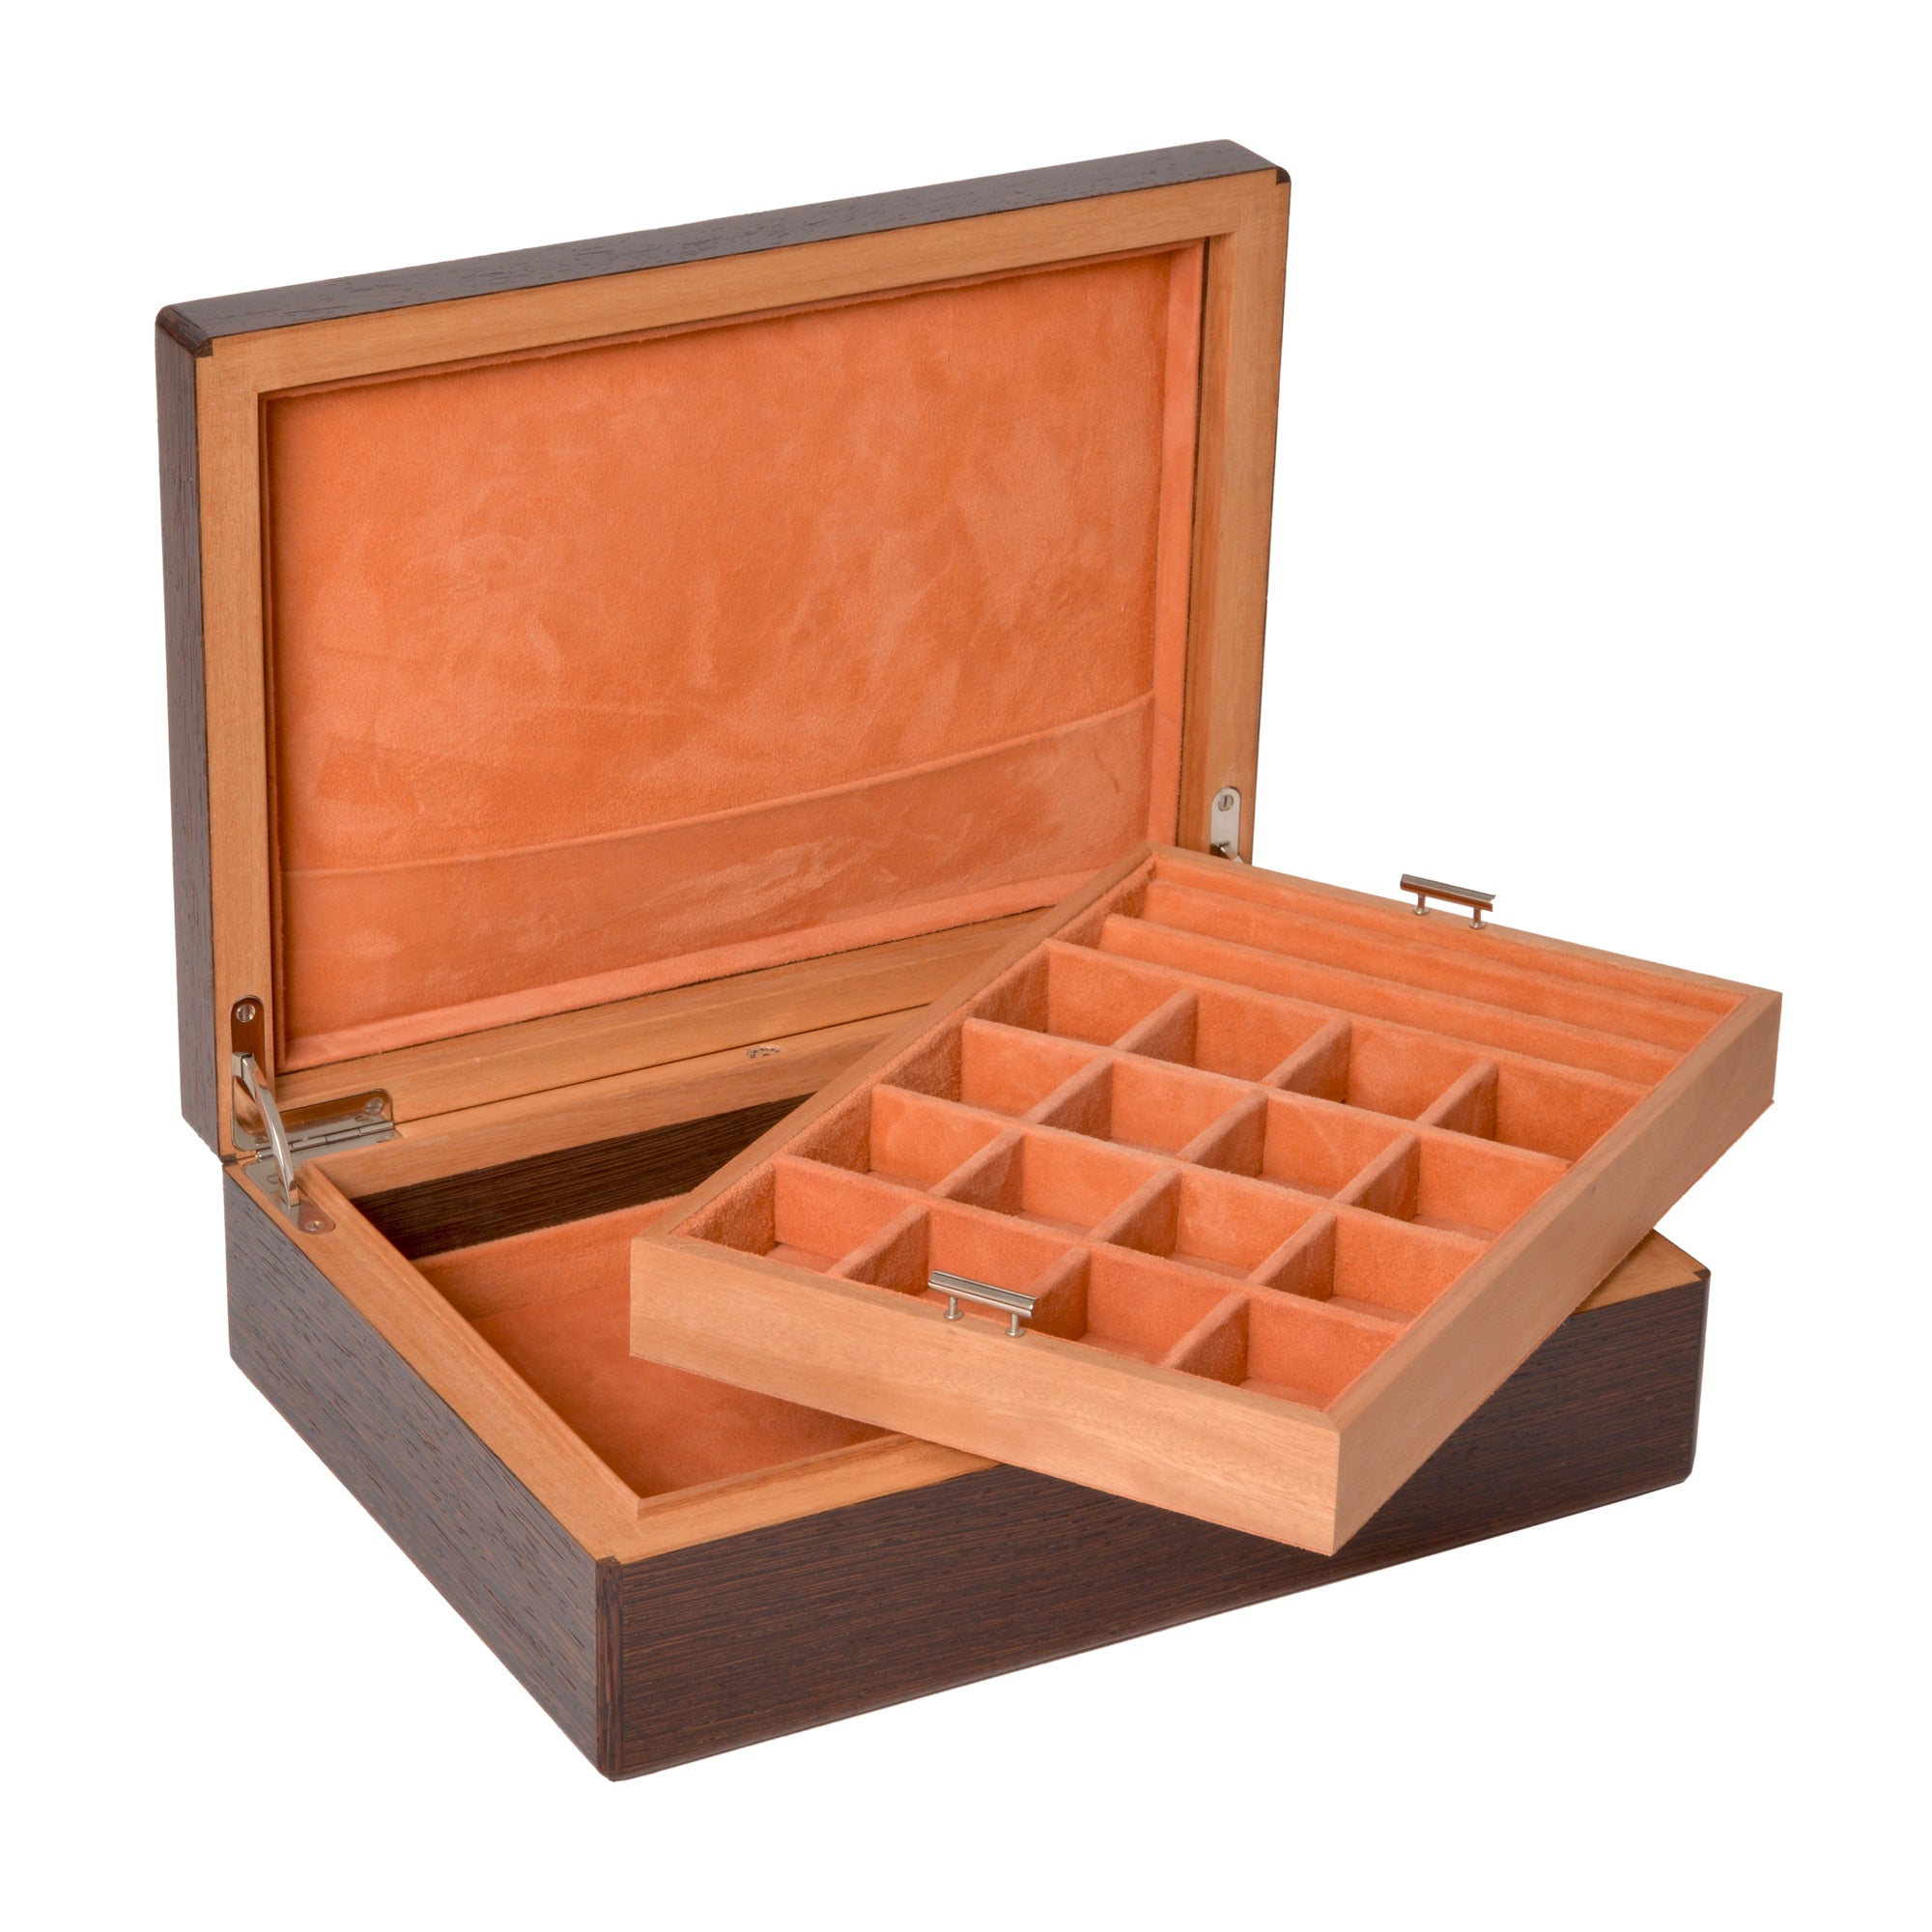 "Classique" - Box for 16 pairs of cufflinks and 2 pens